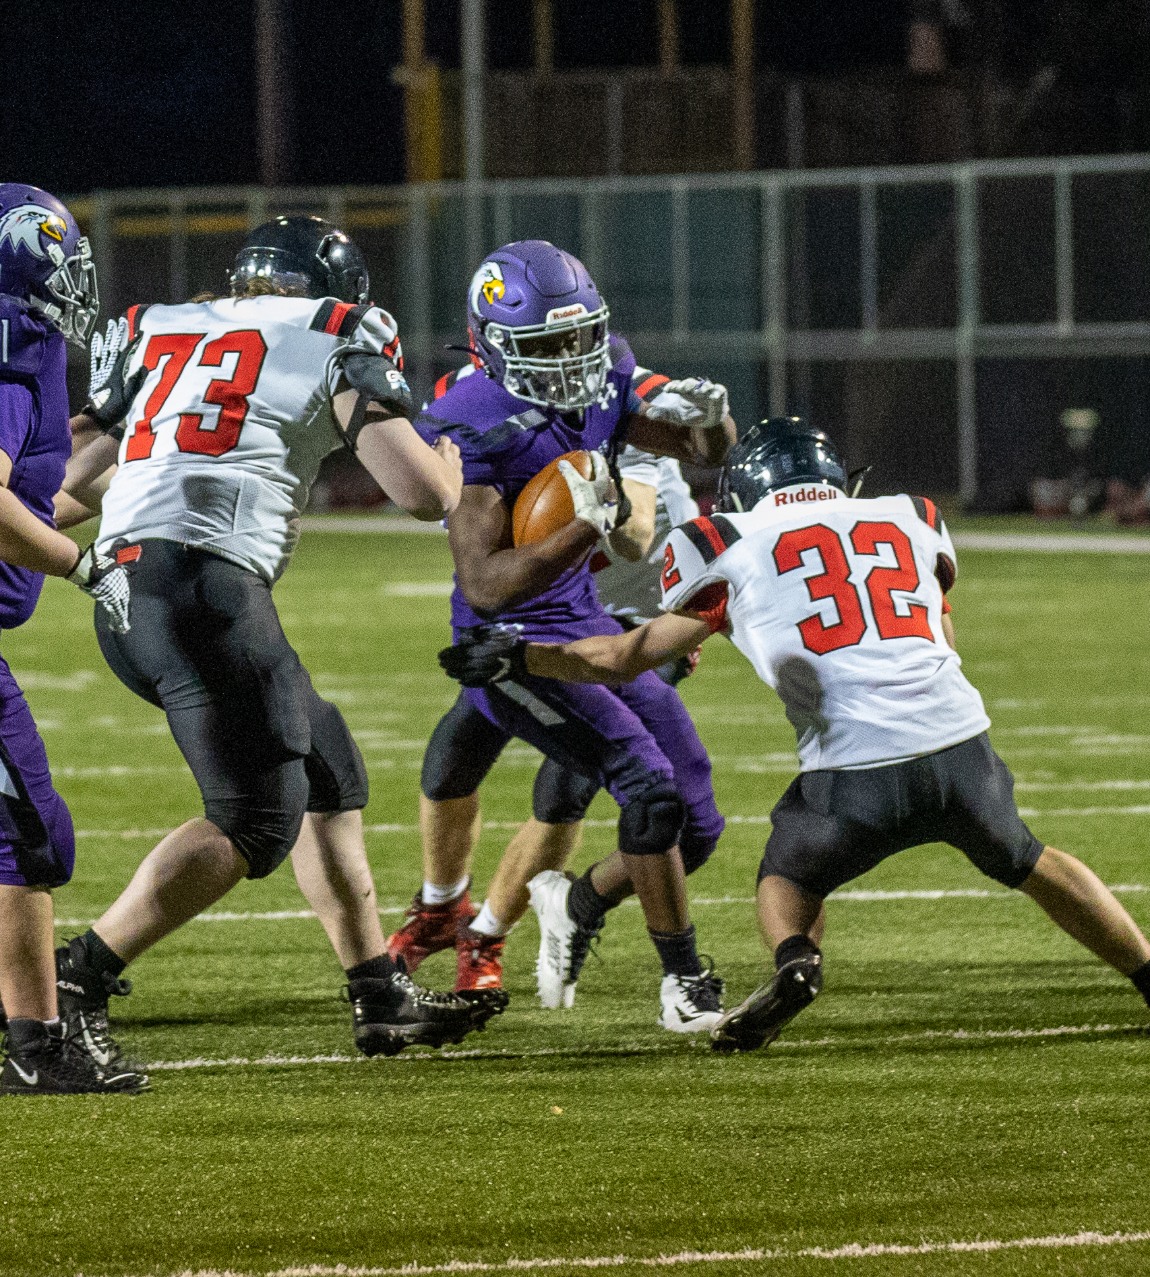 Eau-Claire-Memorial-JV-Football-LaCrosse-Central-at-Home-3-29-21-1845